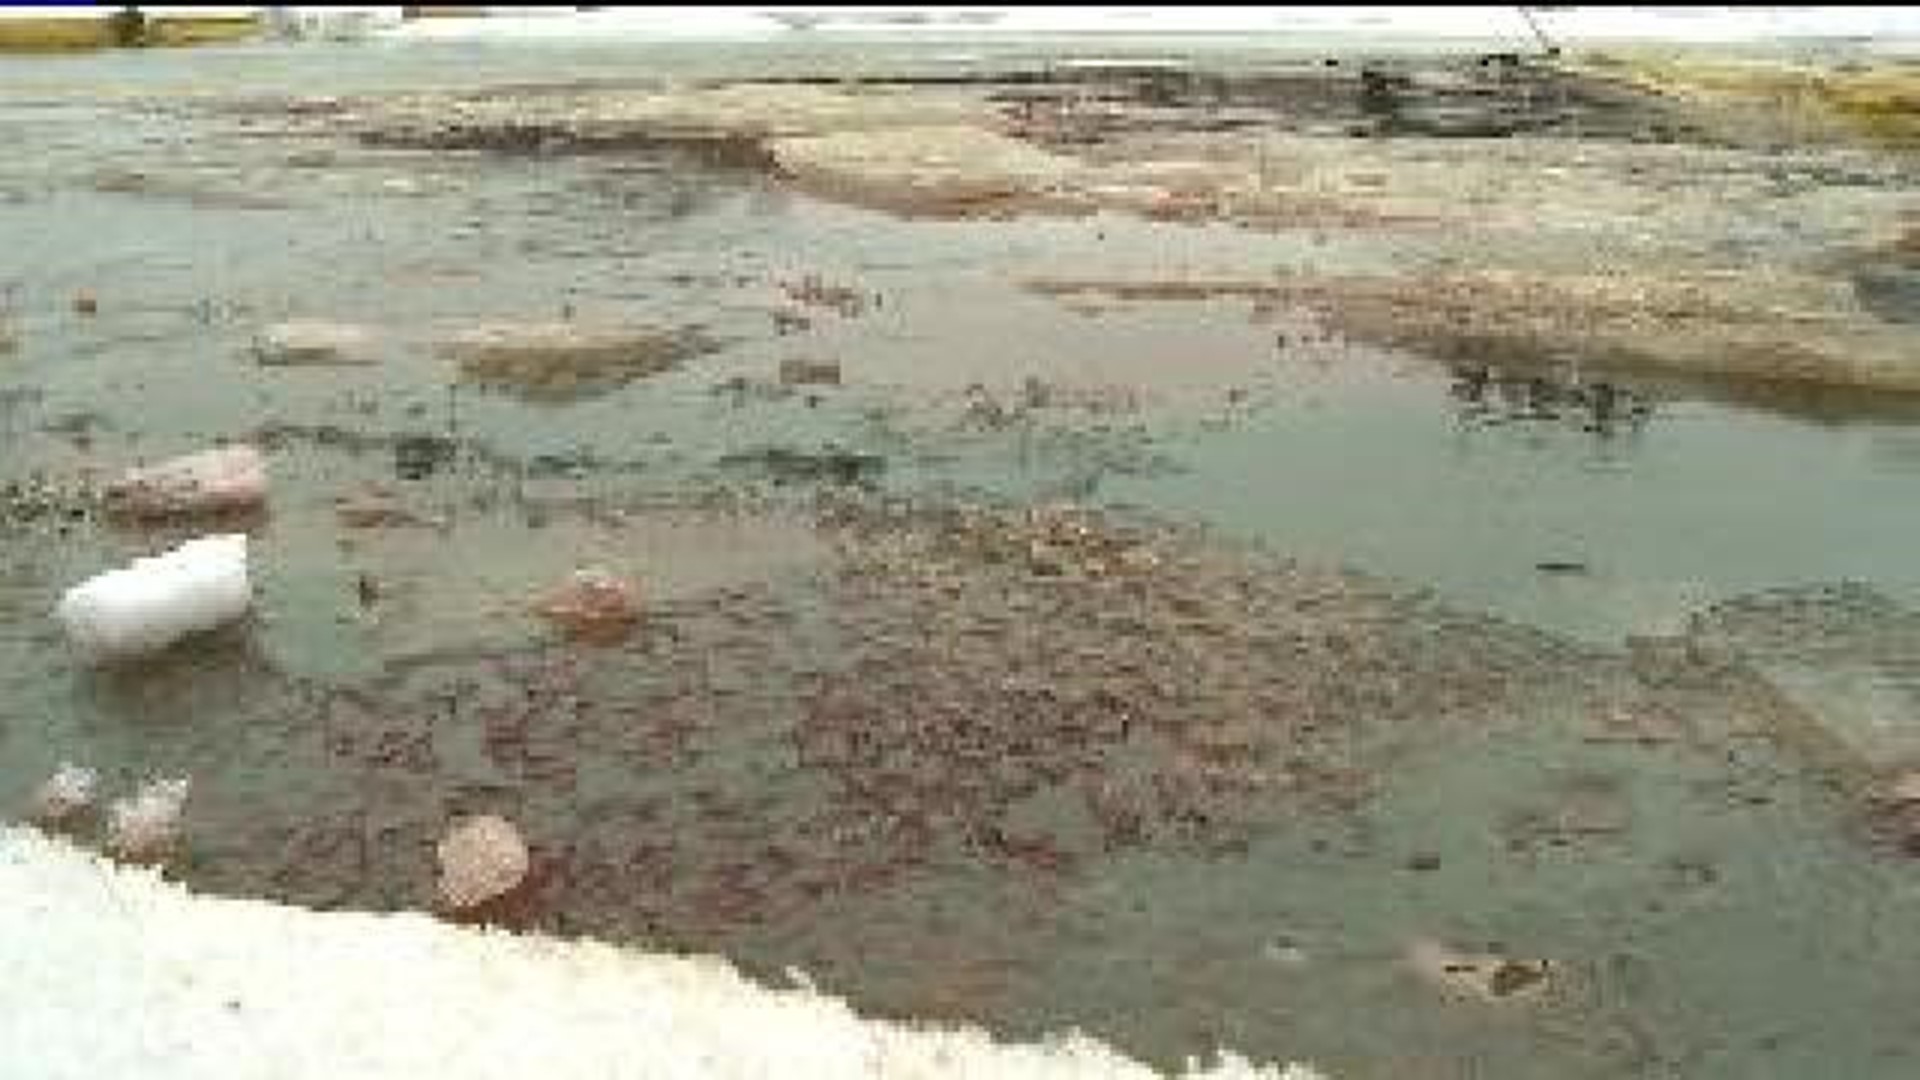 Violations Handed to Oil Company Responsible for Spill